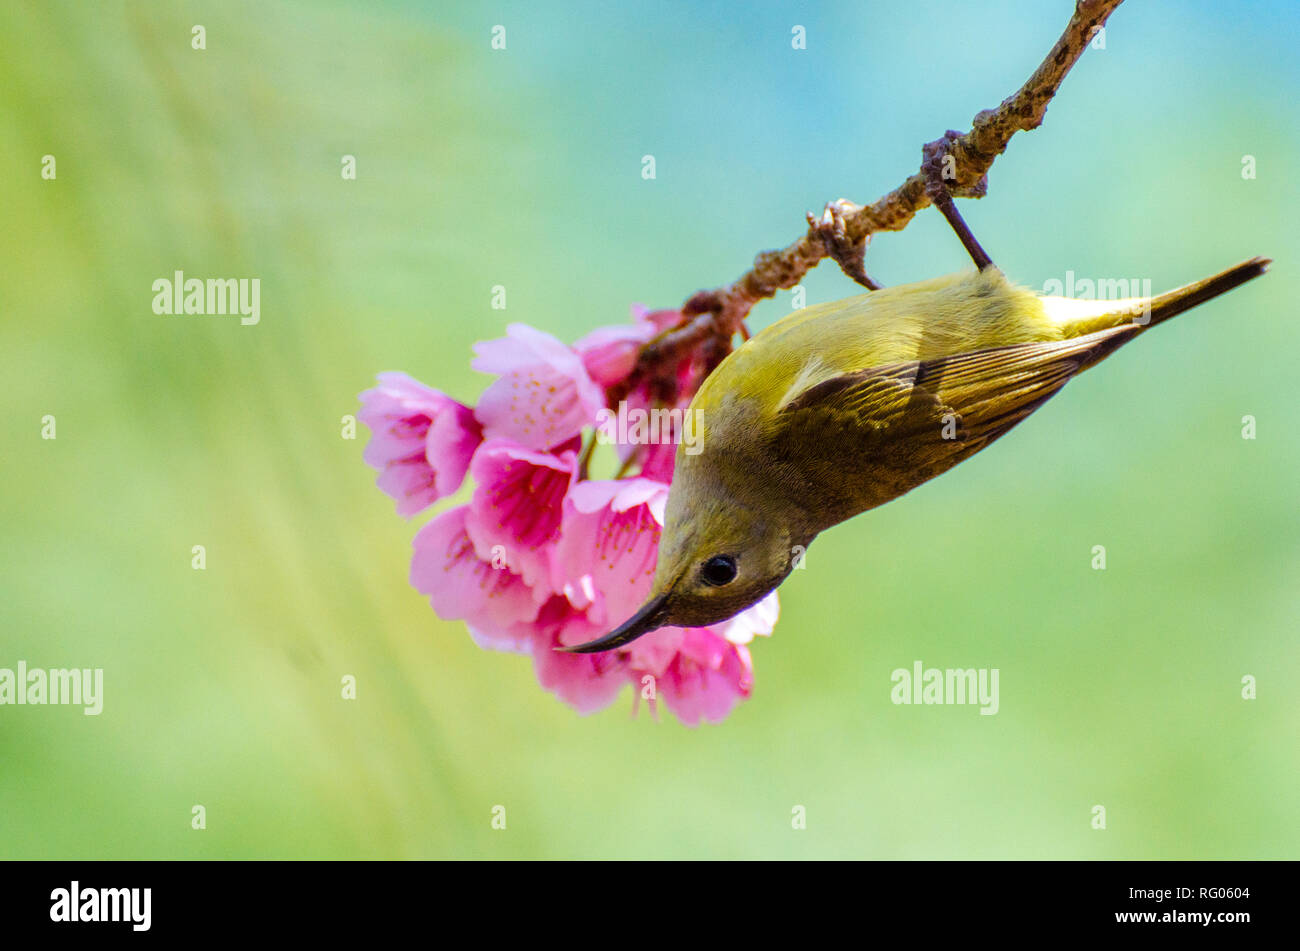 Green bird blue background perched on the cherry blossoms Stock Photo